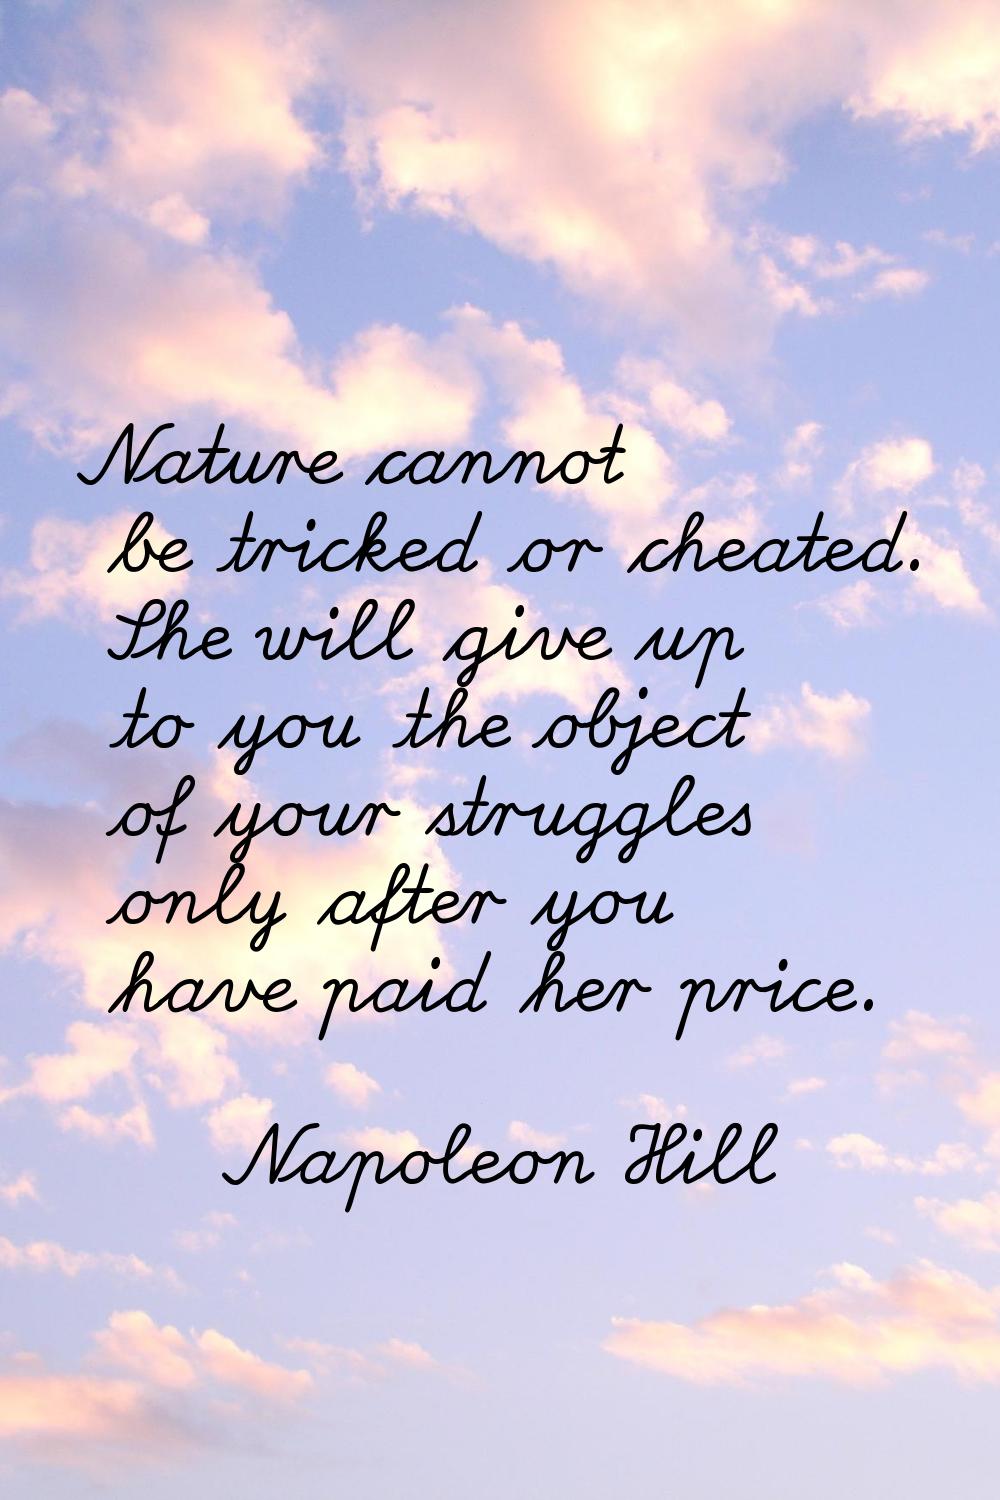 Nature cannot be tricked or cheated. She will give up to you the object of your struggles only afte